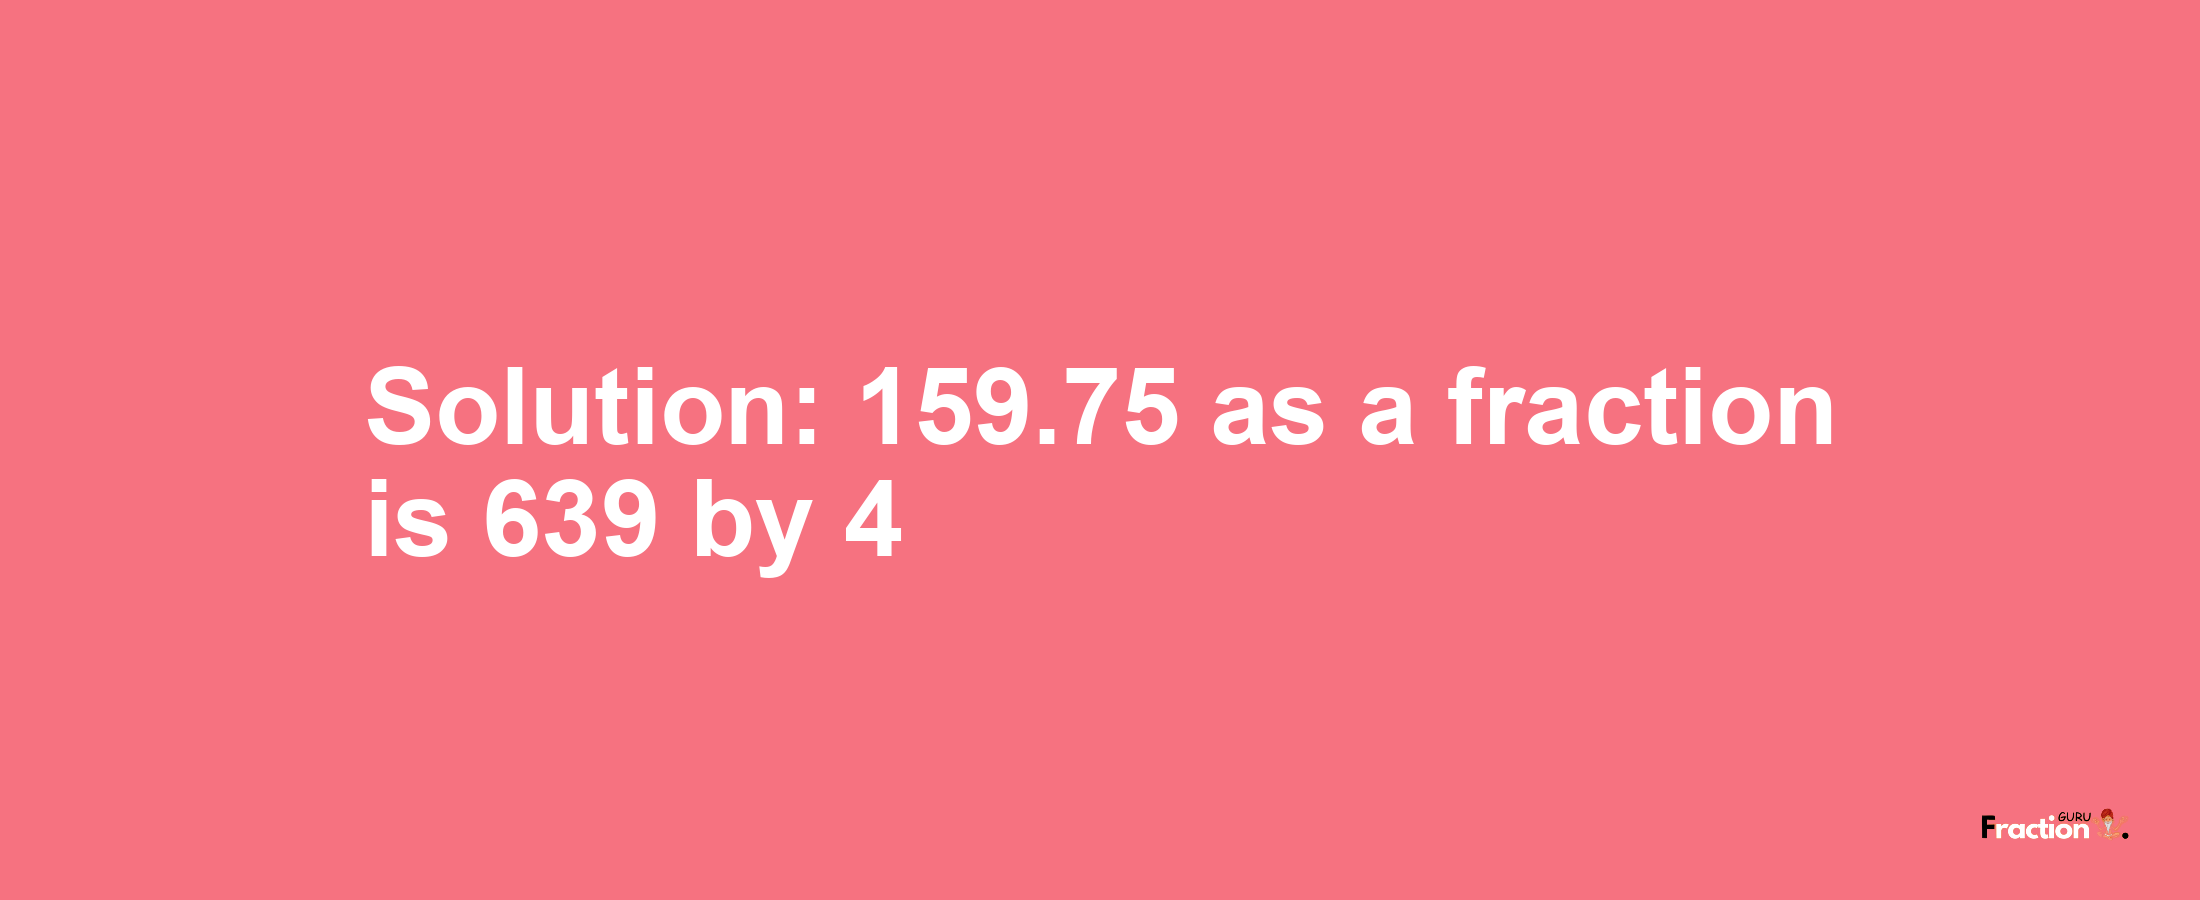 Solution:159.75 as a fraction is 639/4